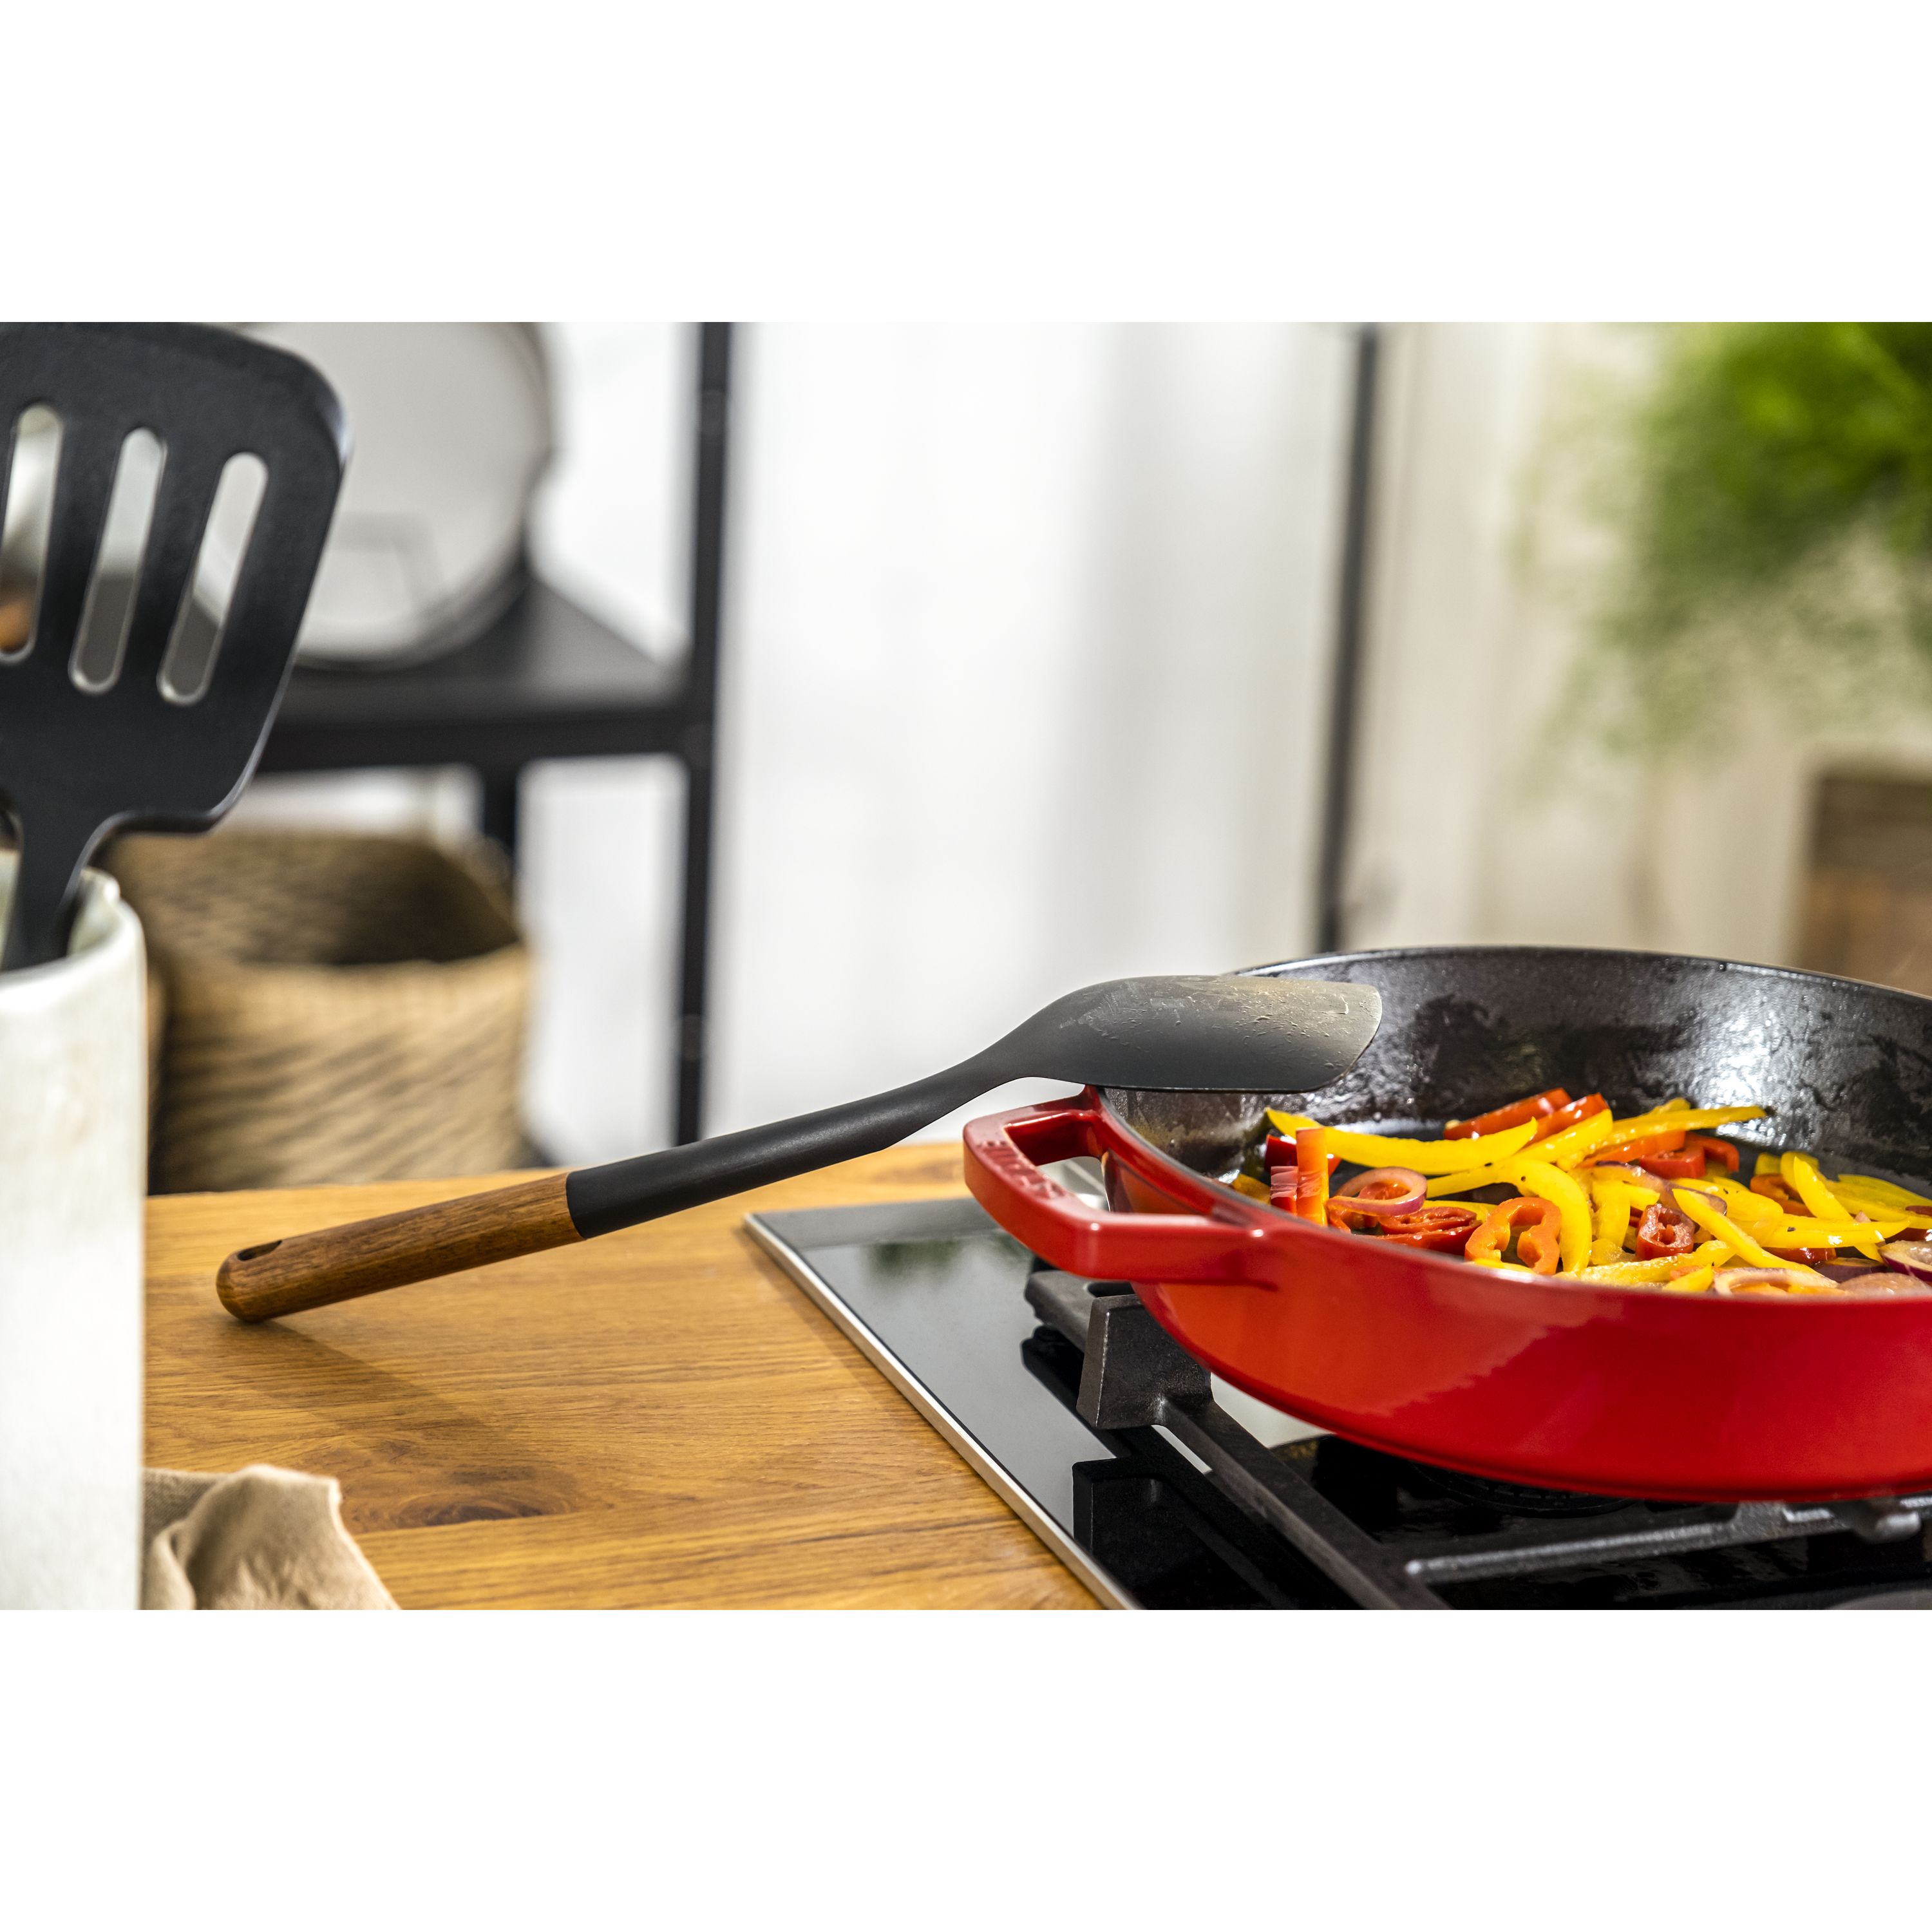  STAUB Wok Spatula, Perfect for Scooping, Flipping, Stirring,  and Turning Stir Fries, One Size, Durable BPA-free Matte Black Silicone,  Acacia Wood Handles, Safe for Nonstick Cooking Surfaces: Home & Kitchen